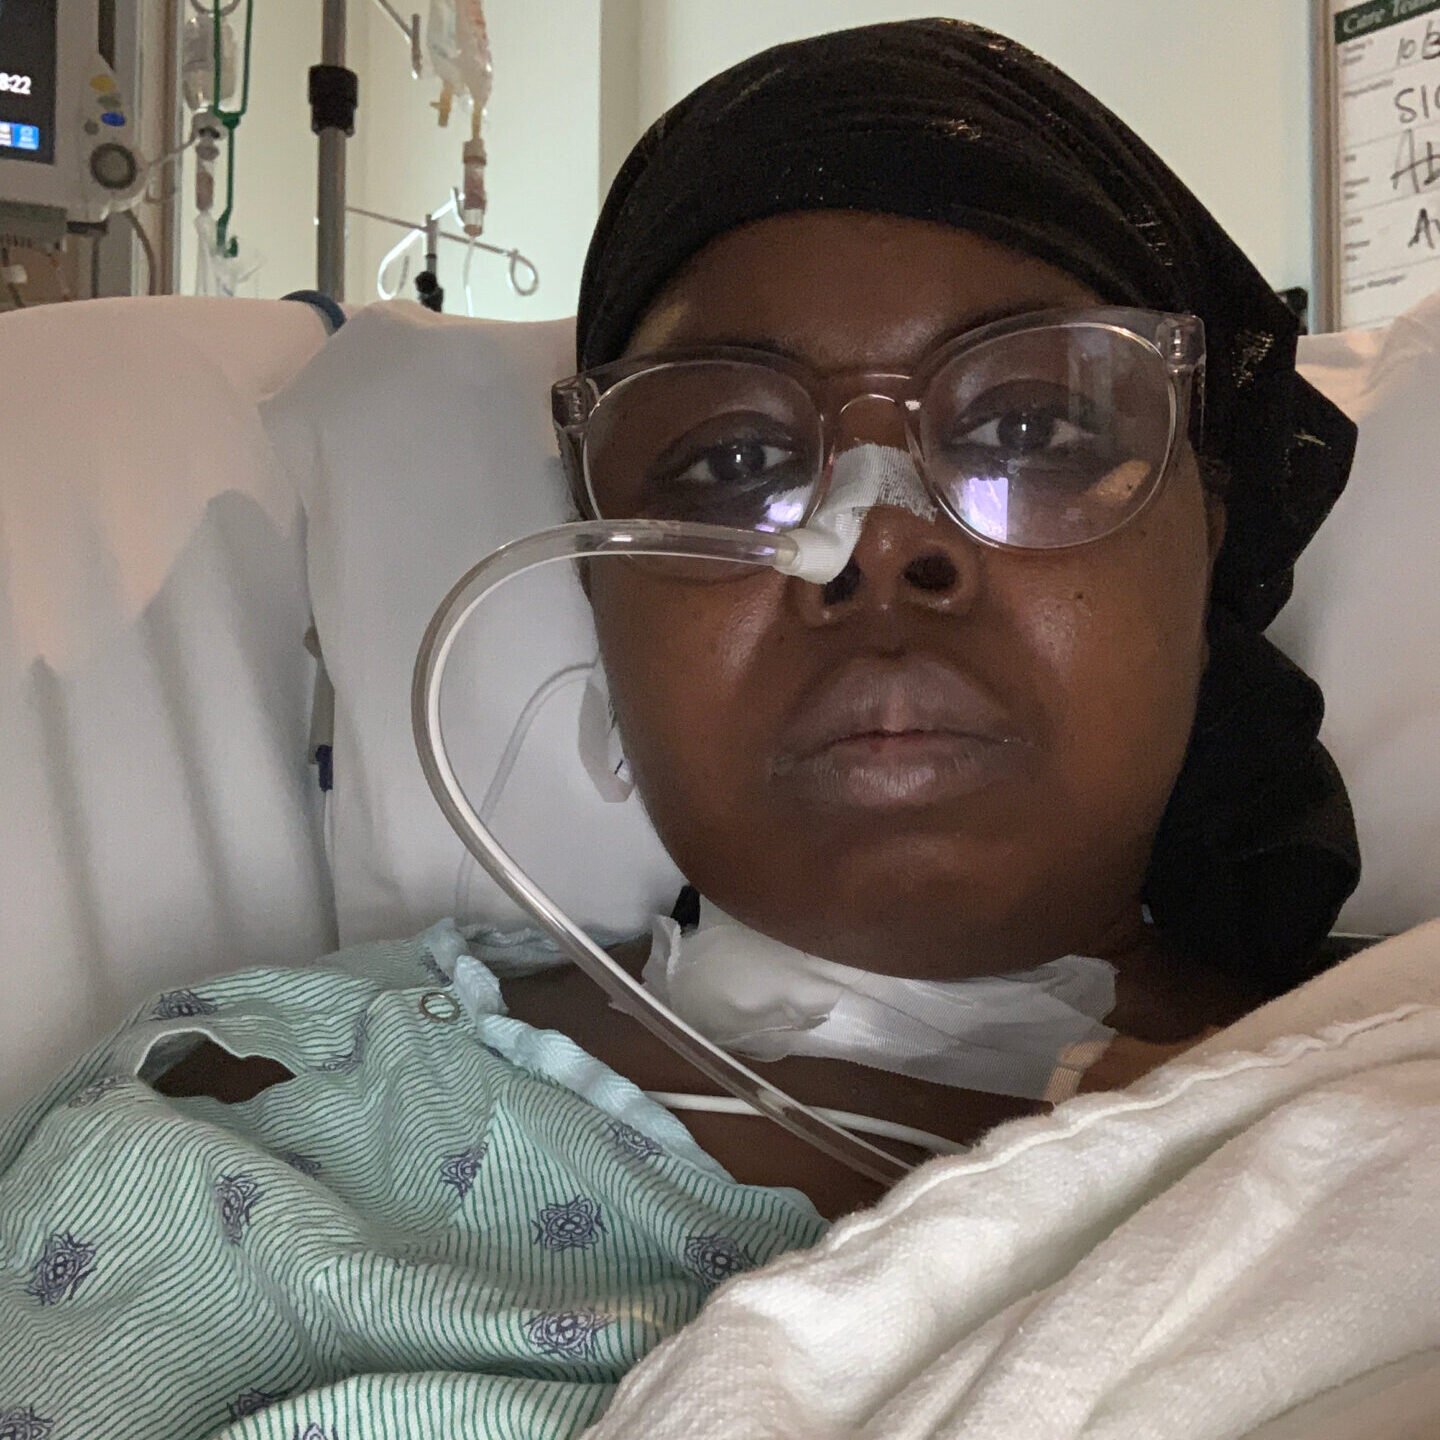 Zykeisha shares her side effects from chemo